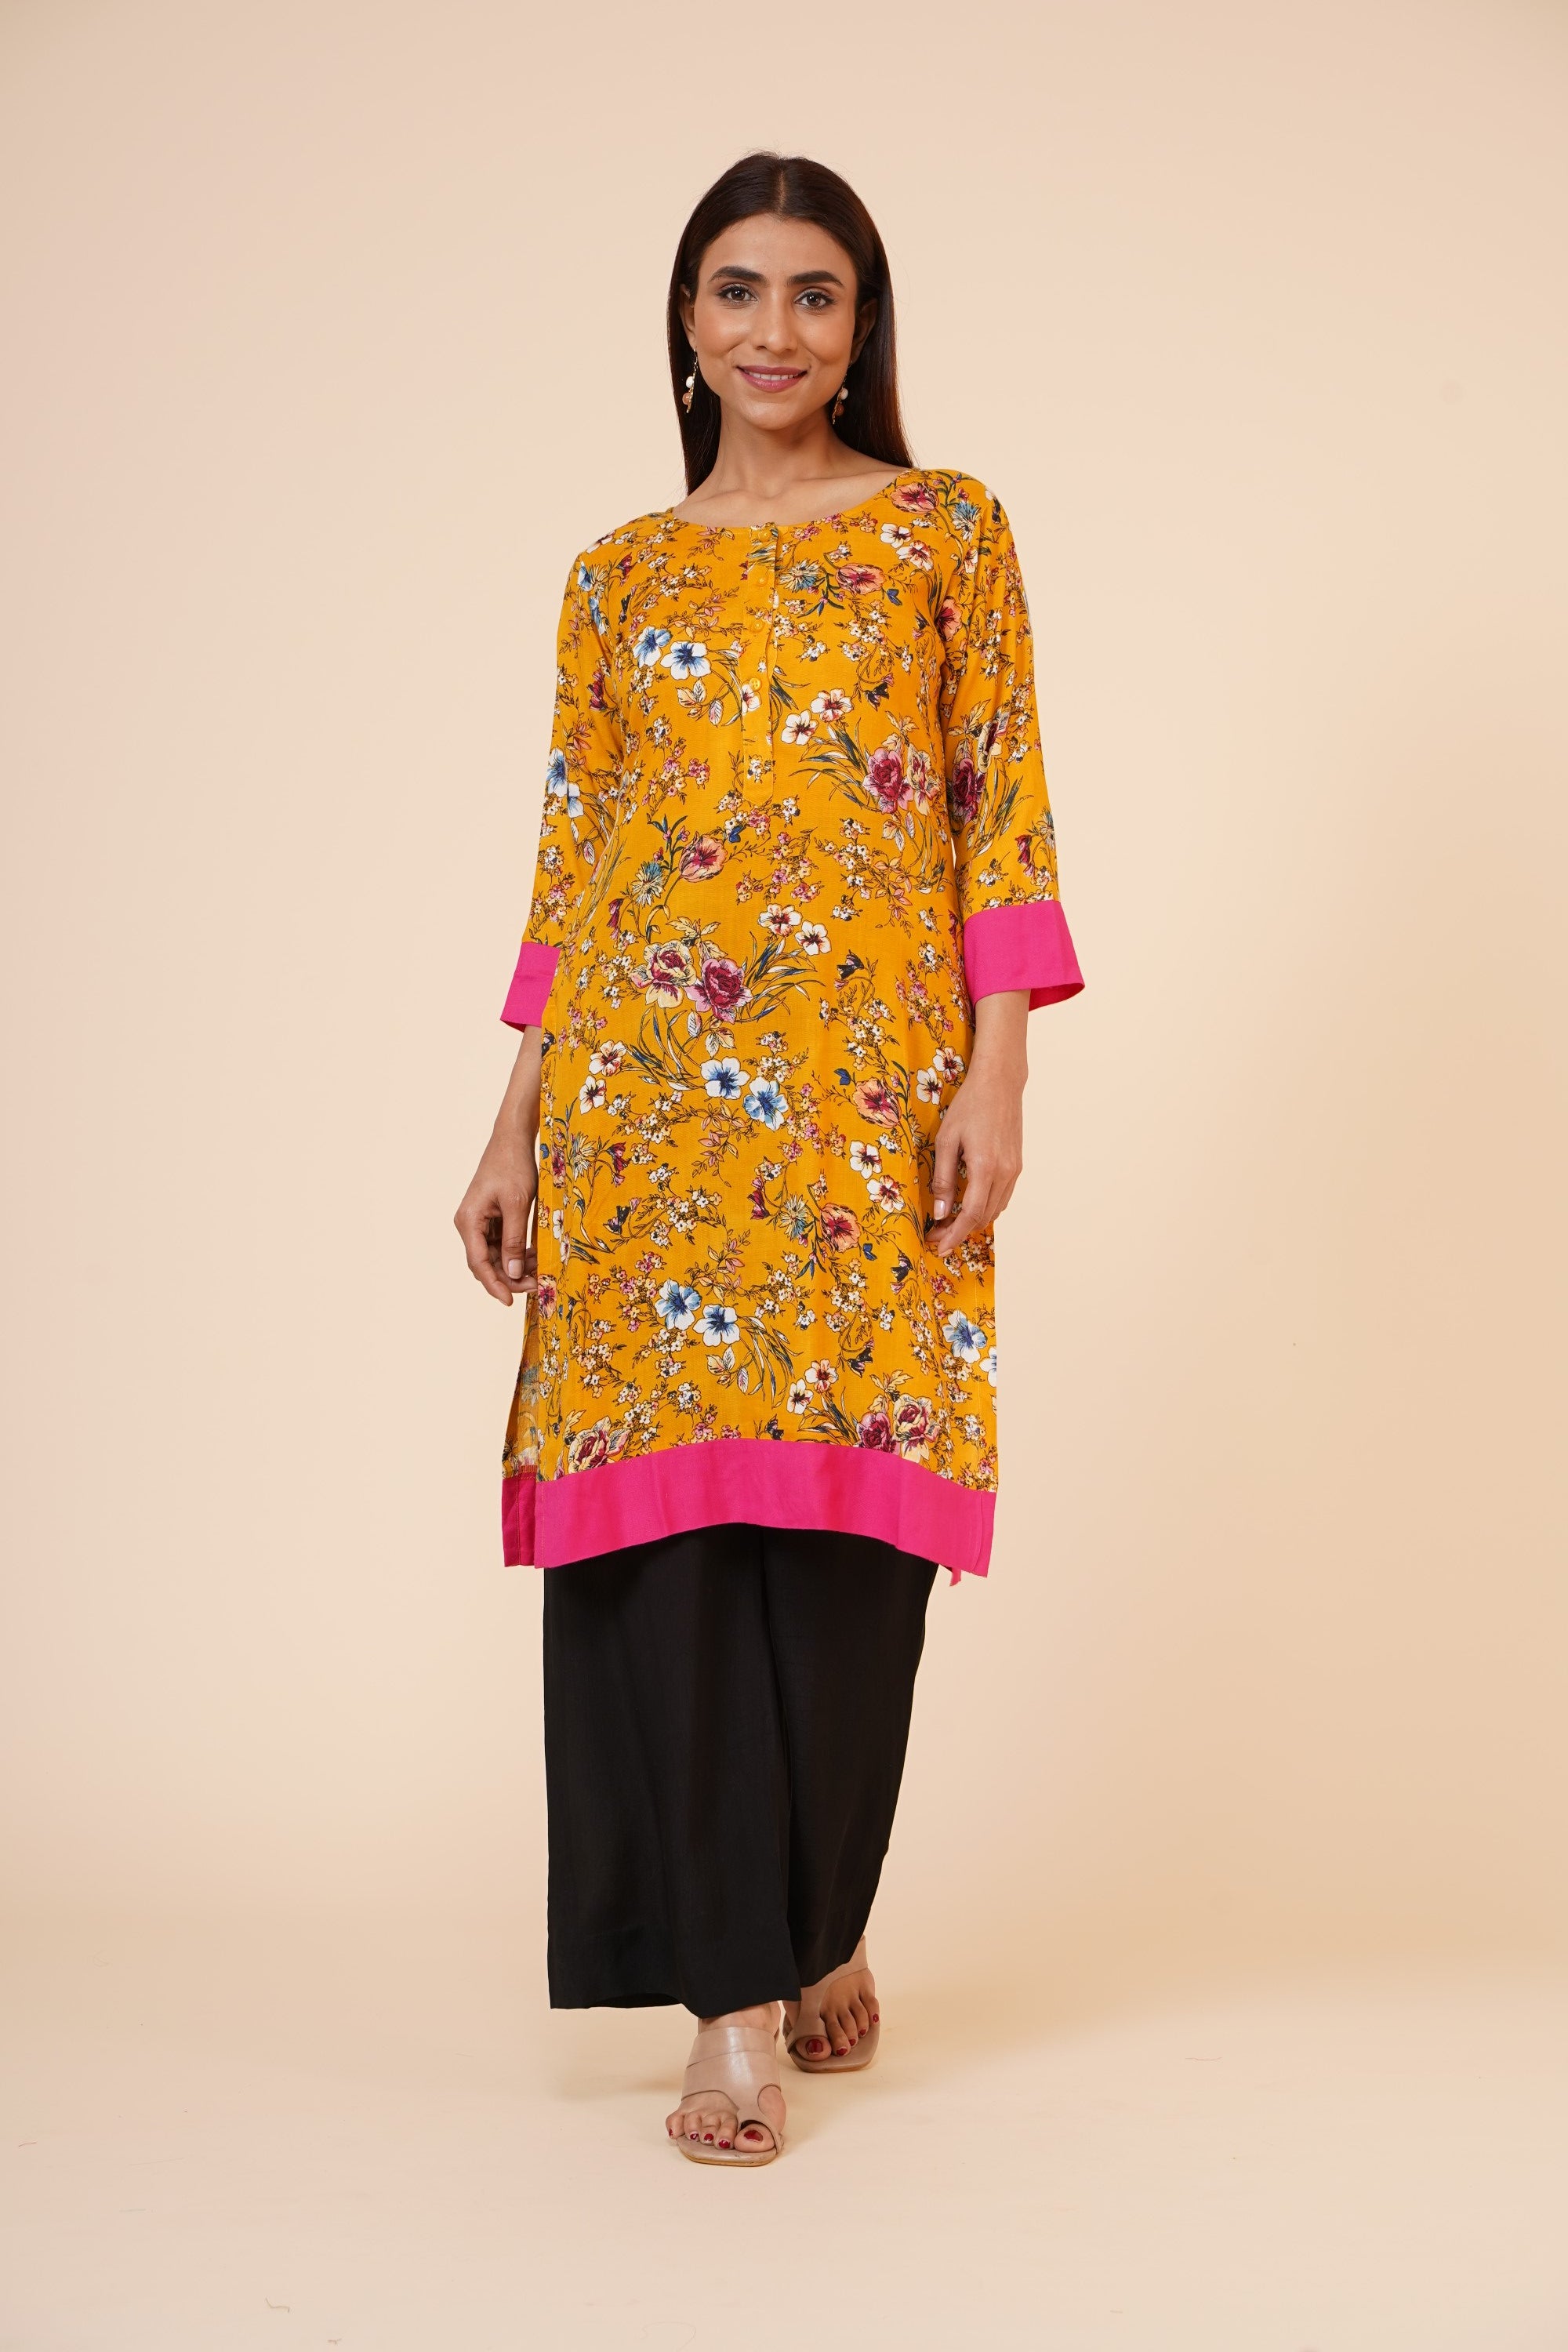 Women's Indian Kurti With Buttoned Placket And Cuff - MIRACOLOS by Ruchi